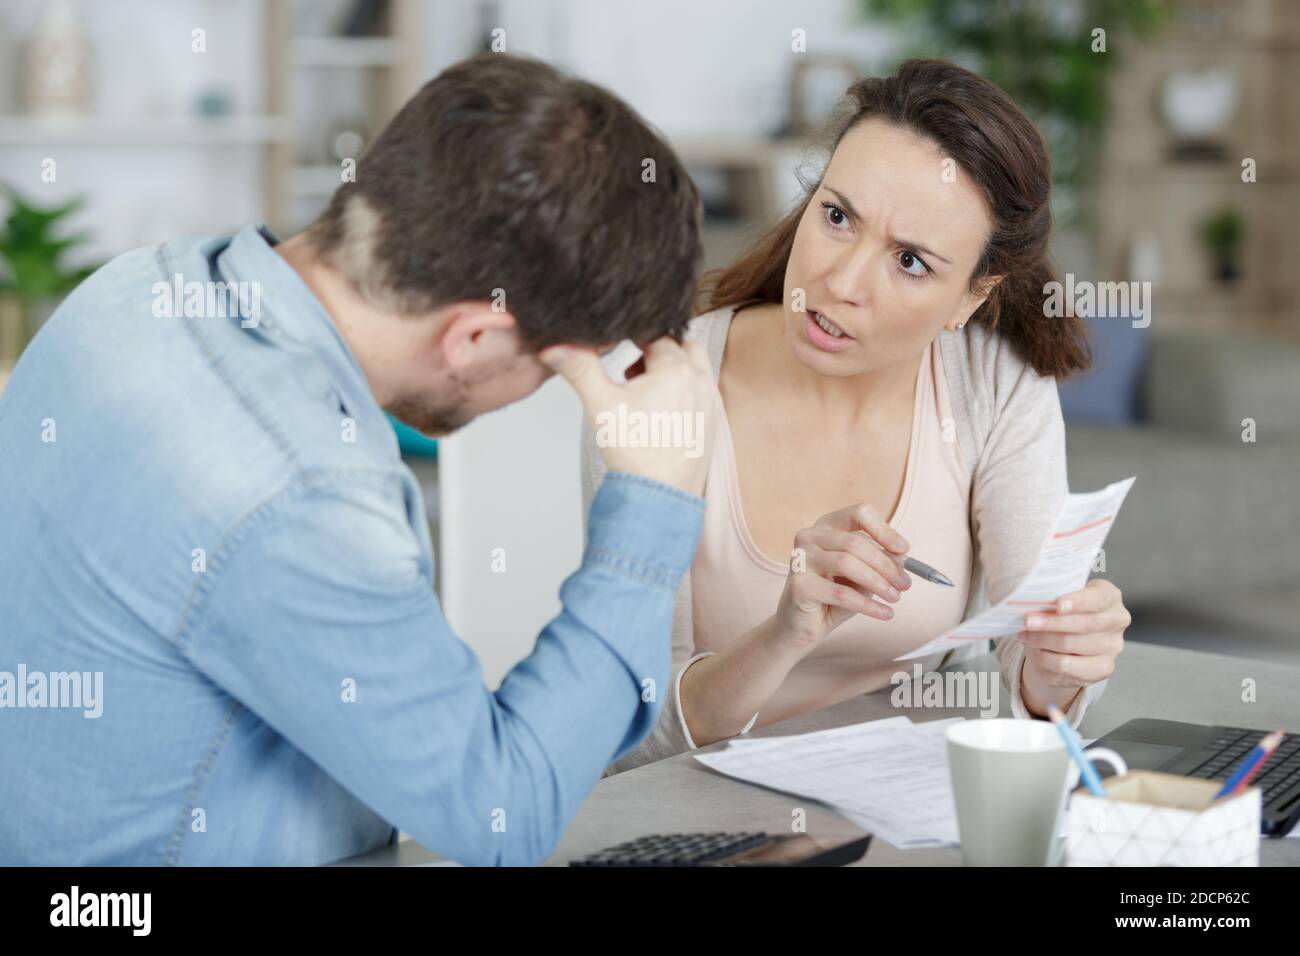 woman confronting her partner over a receipt Stock Photo